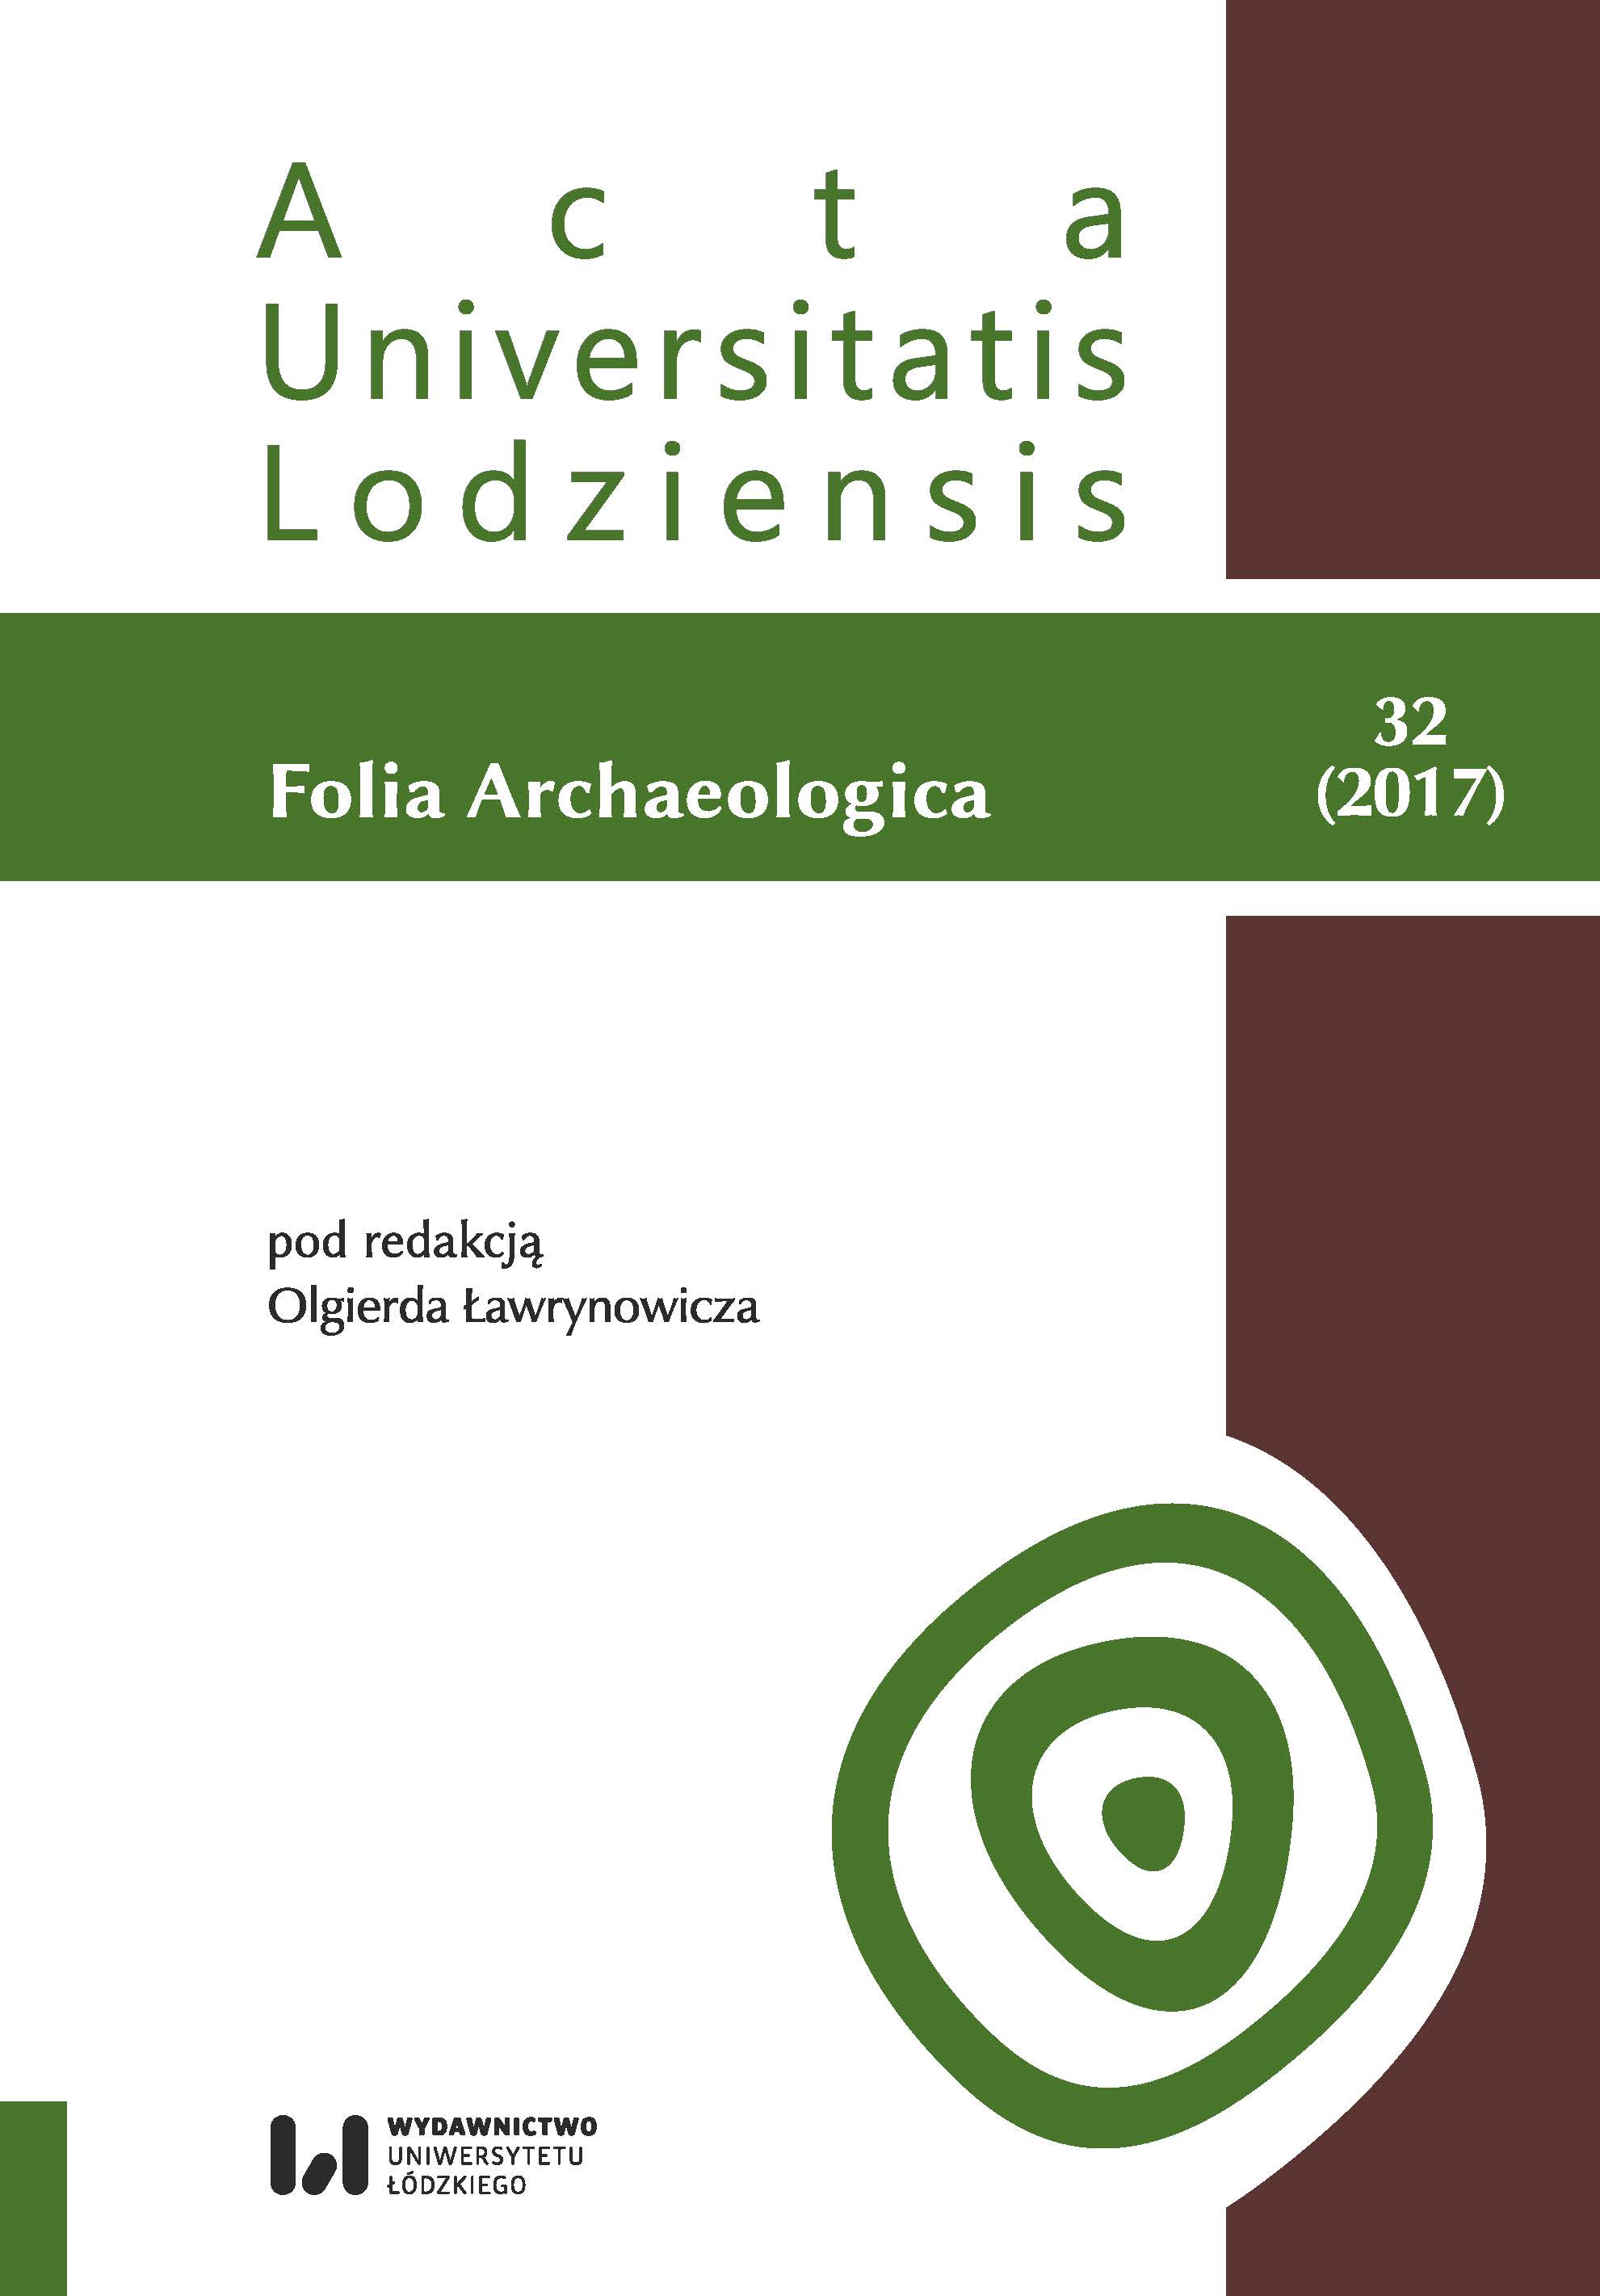 Relicts of the deserted villages at the masurian-mazovian borderland. Interdisciplinary research project Cover Image